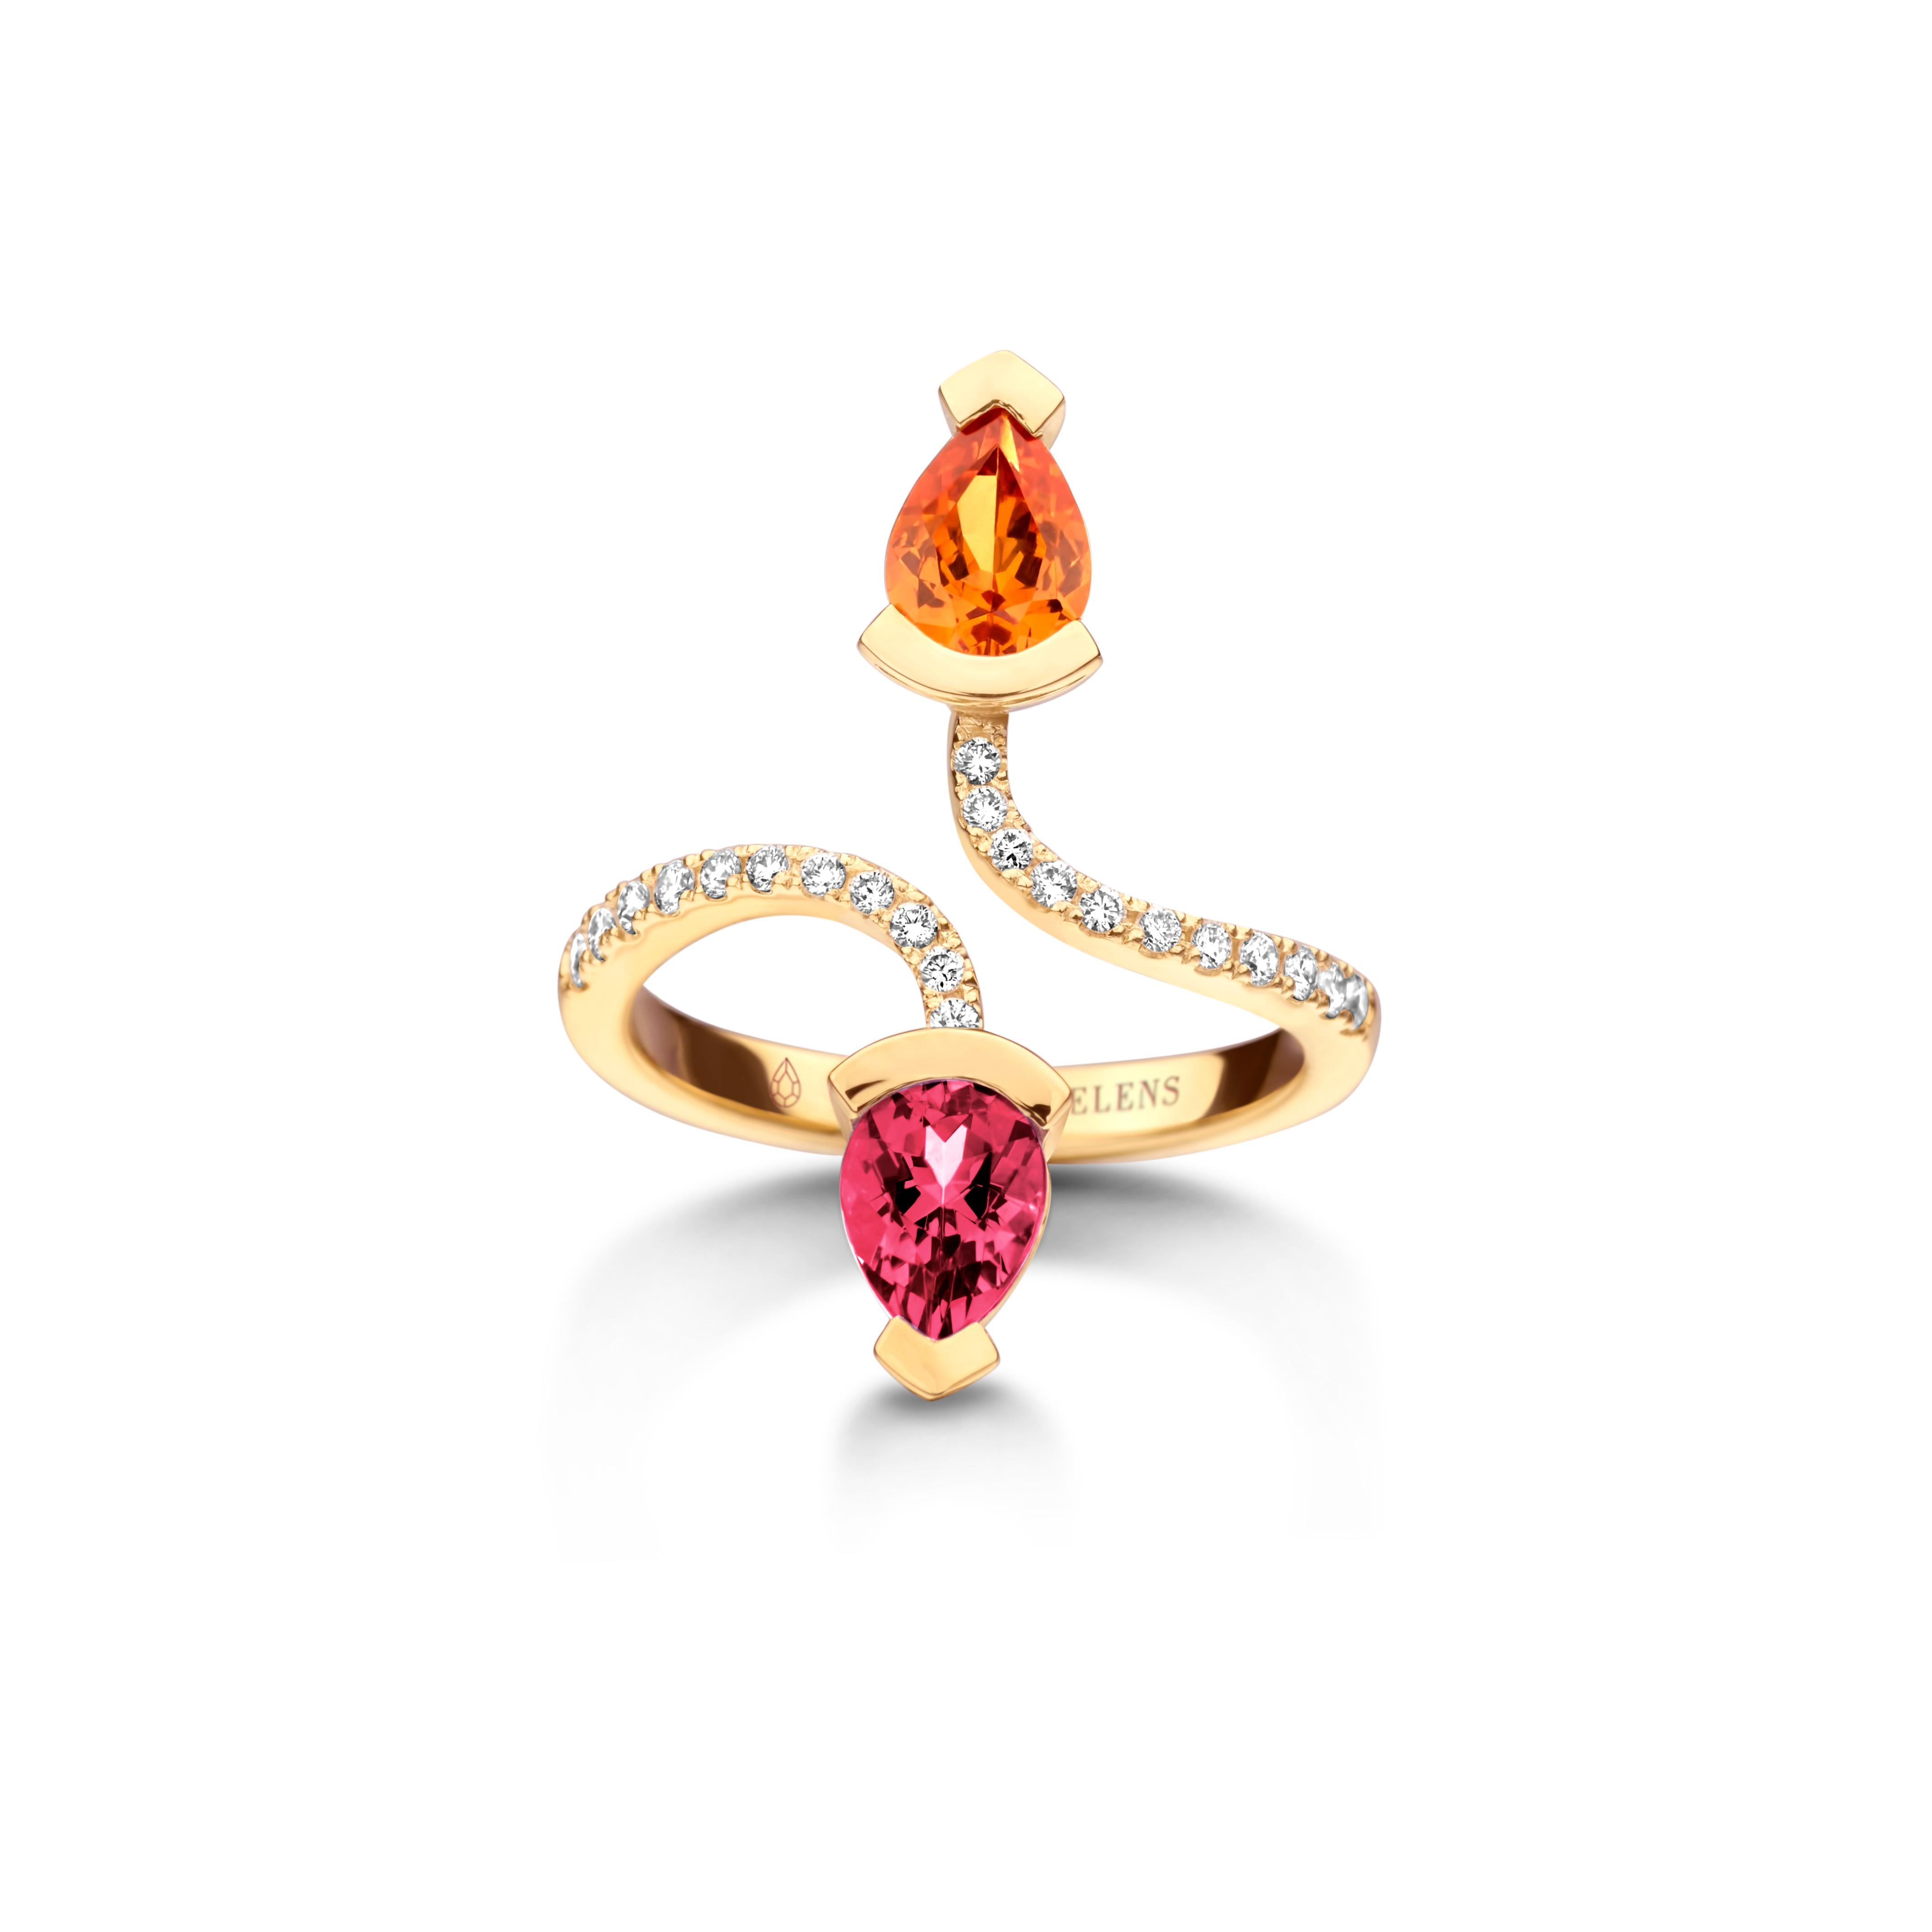 Contemporary Mandarin Garnet And Rubellite White Gold Diamond Cocktail Ring For Sale